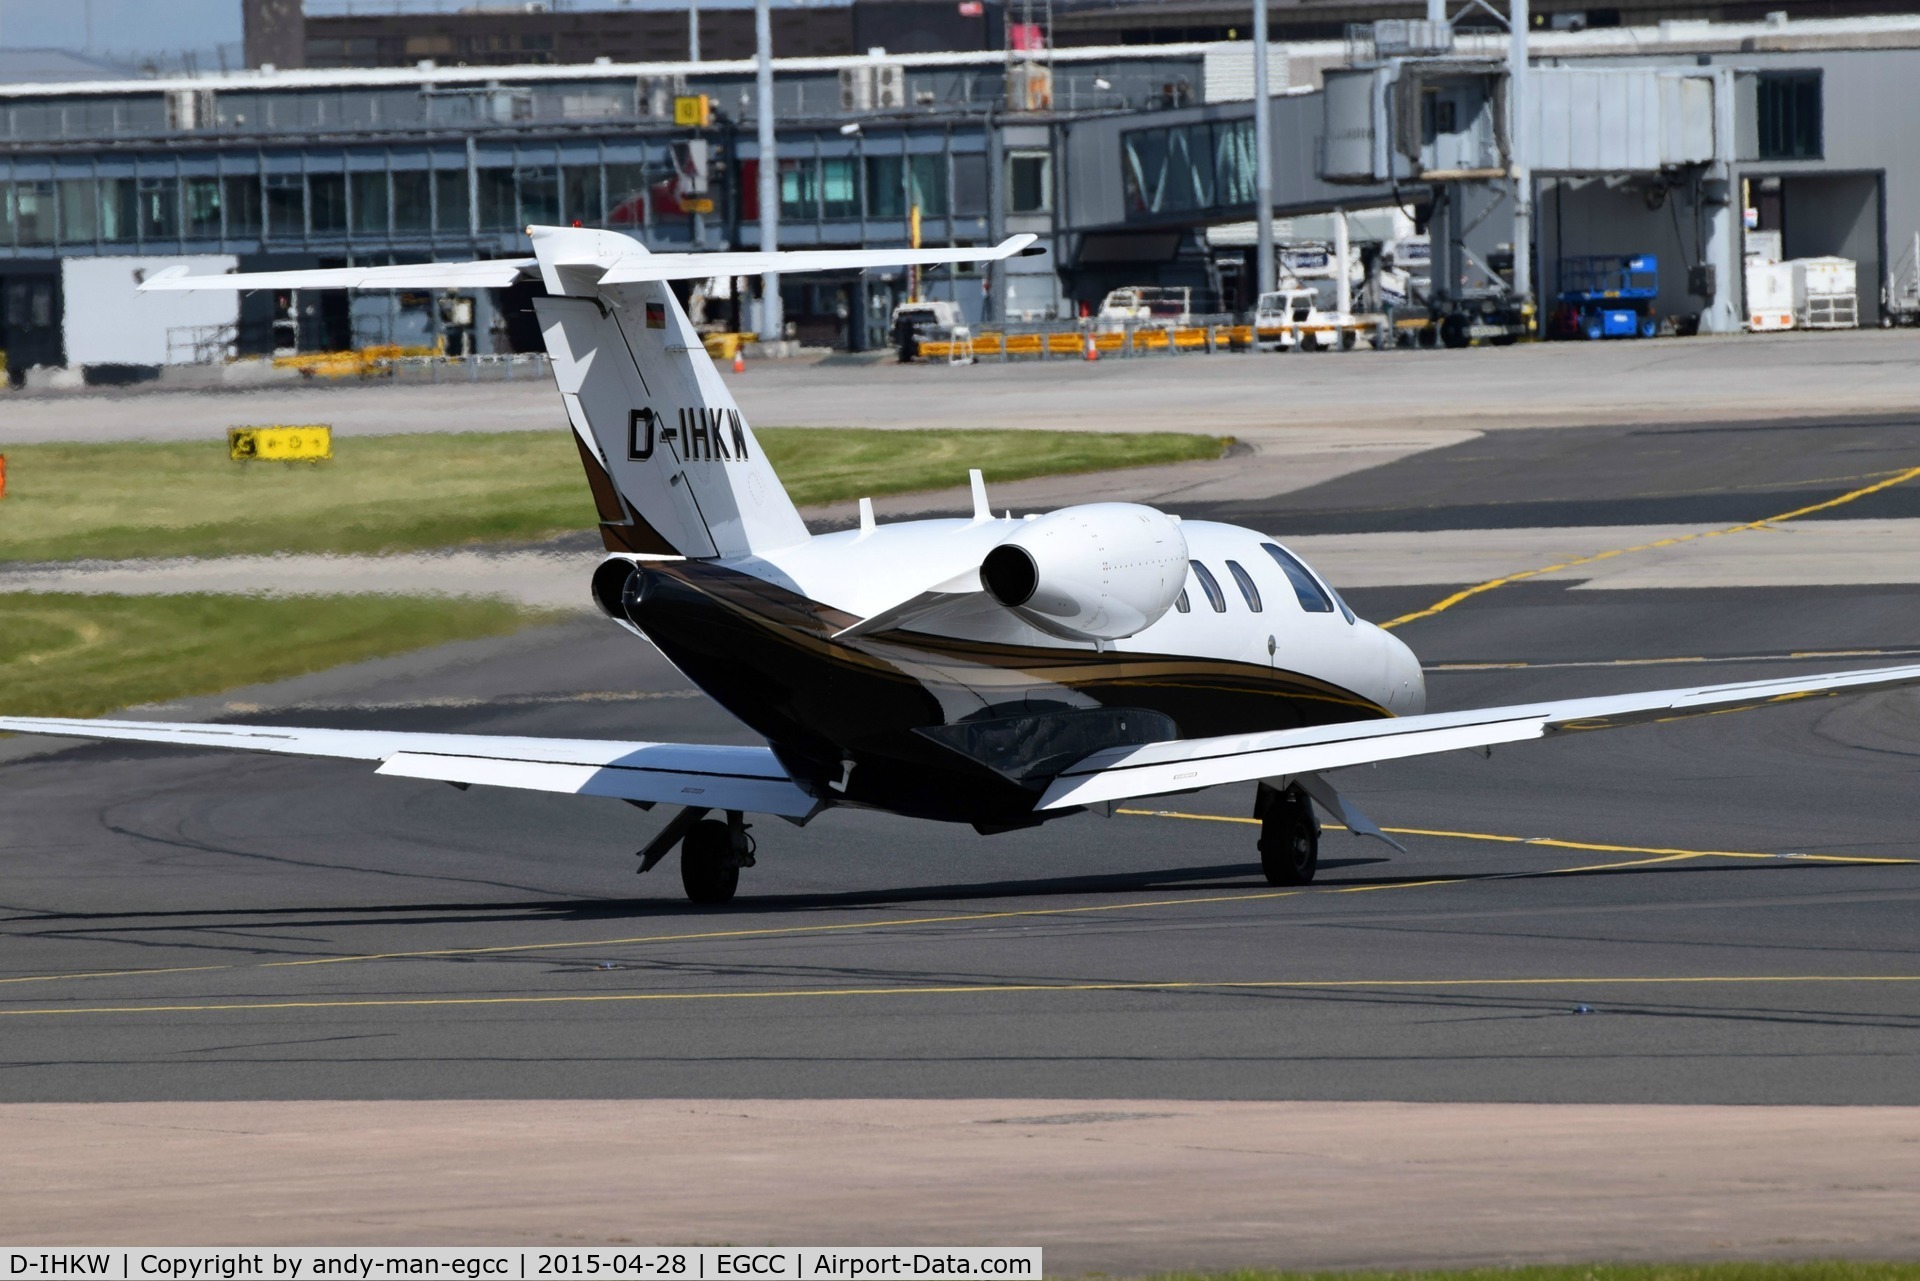 D-IHKW, 2008 Cessna 525 CitationJet CJ1+ C/N 525-0677, dept the landmark exc ramp now taxing out to the runway for take off